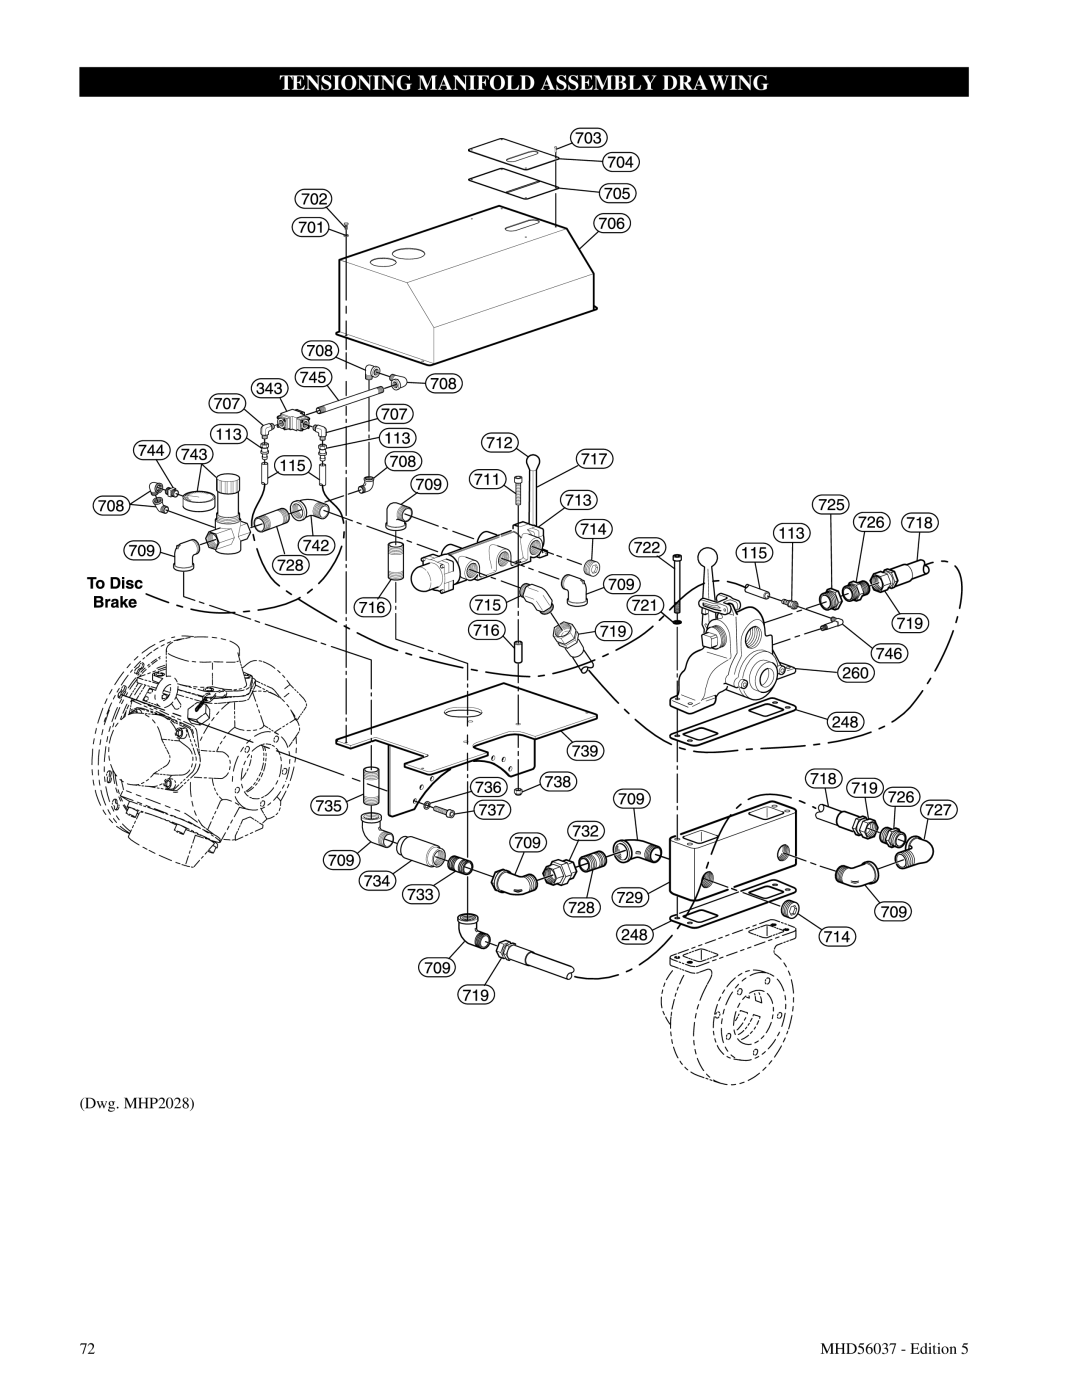 Ingersoll-Rand FA5T manual Tensioning Manifold Assembly Drawing, Dwg. MHP2028, MHD56037 - Edition 